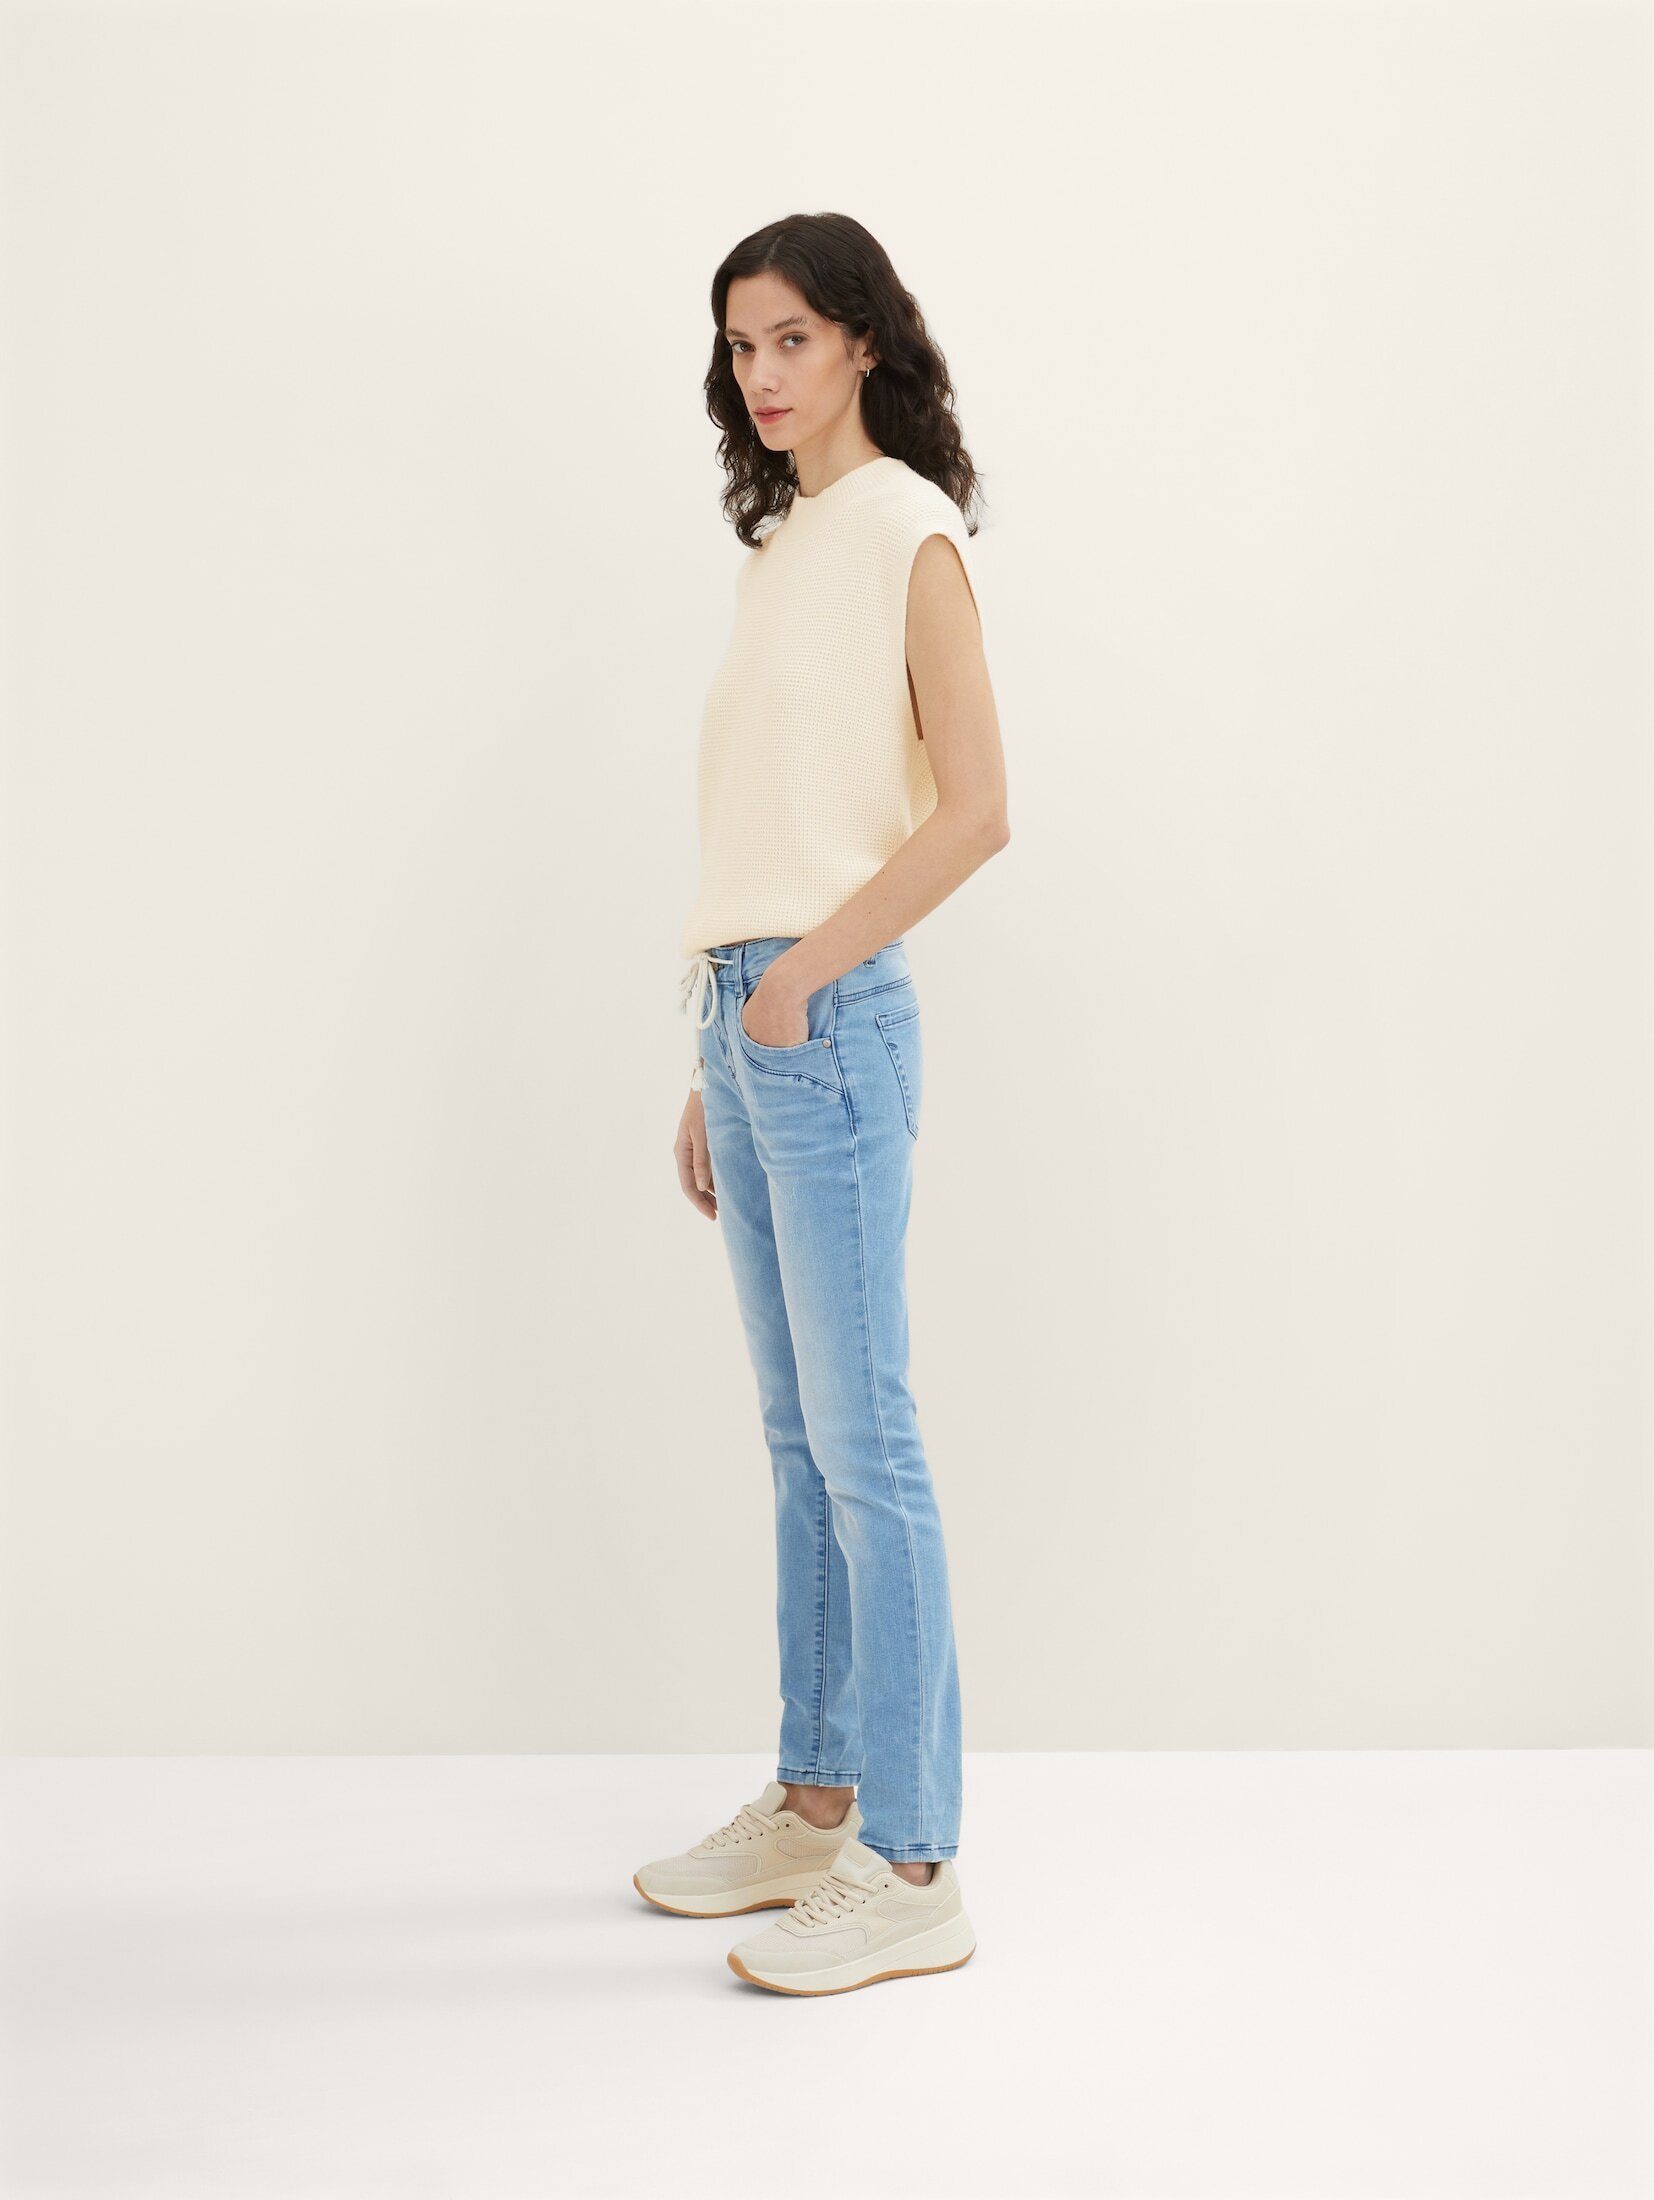 TOM TAILOR Skinny-fit-Jeans Tapered Relaxed Denim Stone Blue Jeans Light